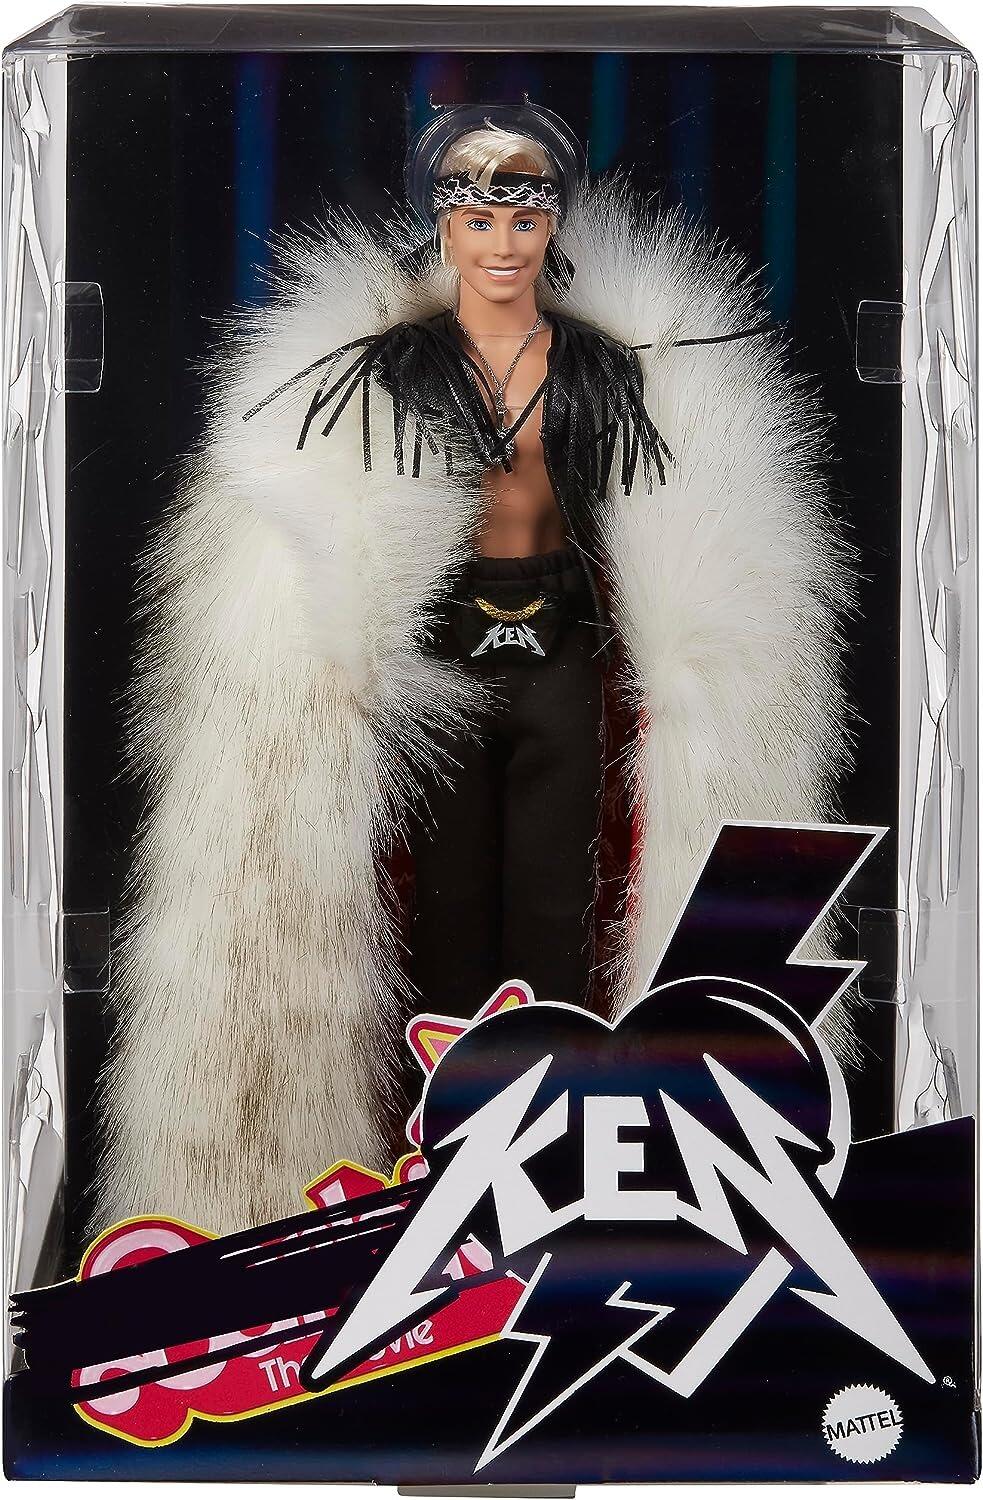 Barbie The Movie - Ken rocker Doll with fringed vest and bandana